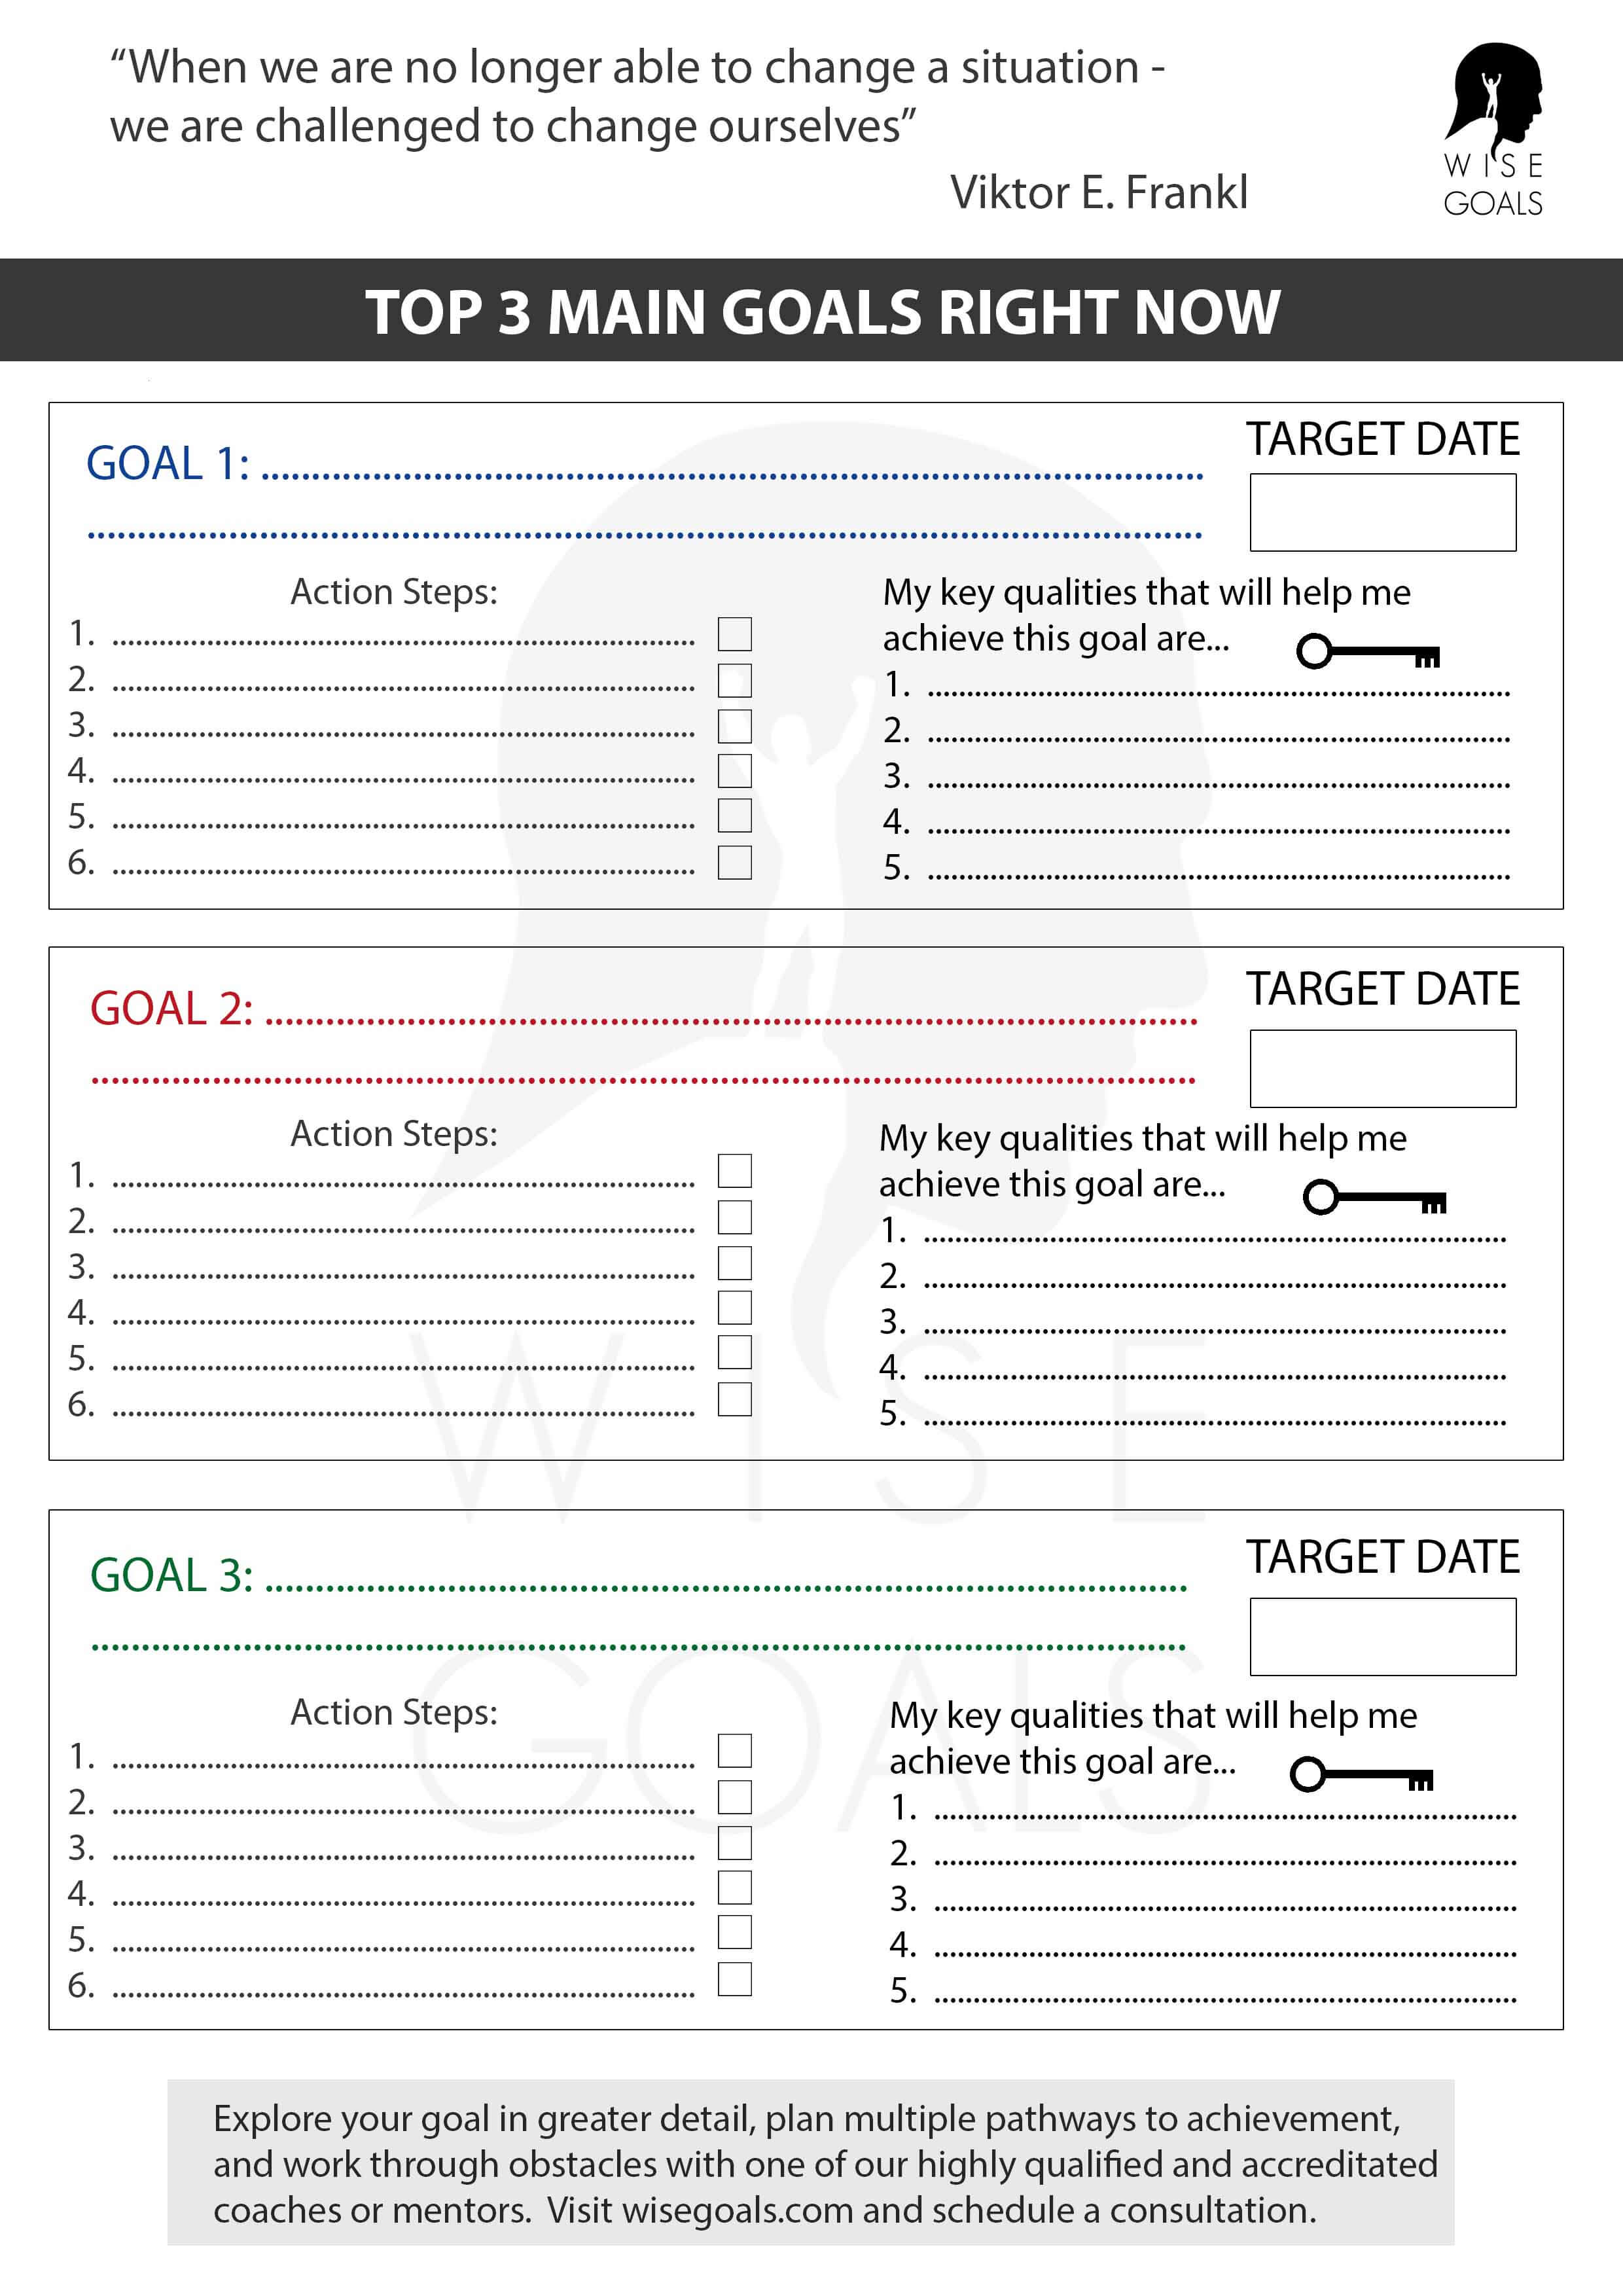 6-useful-goal-setting-templates-and-one-step-closer-to-achievement